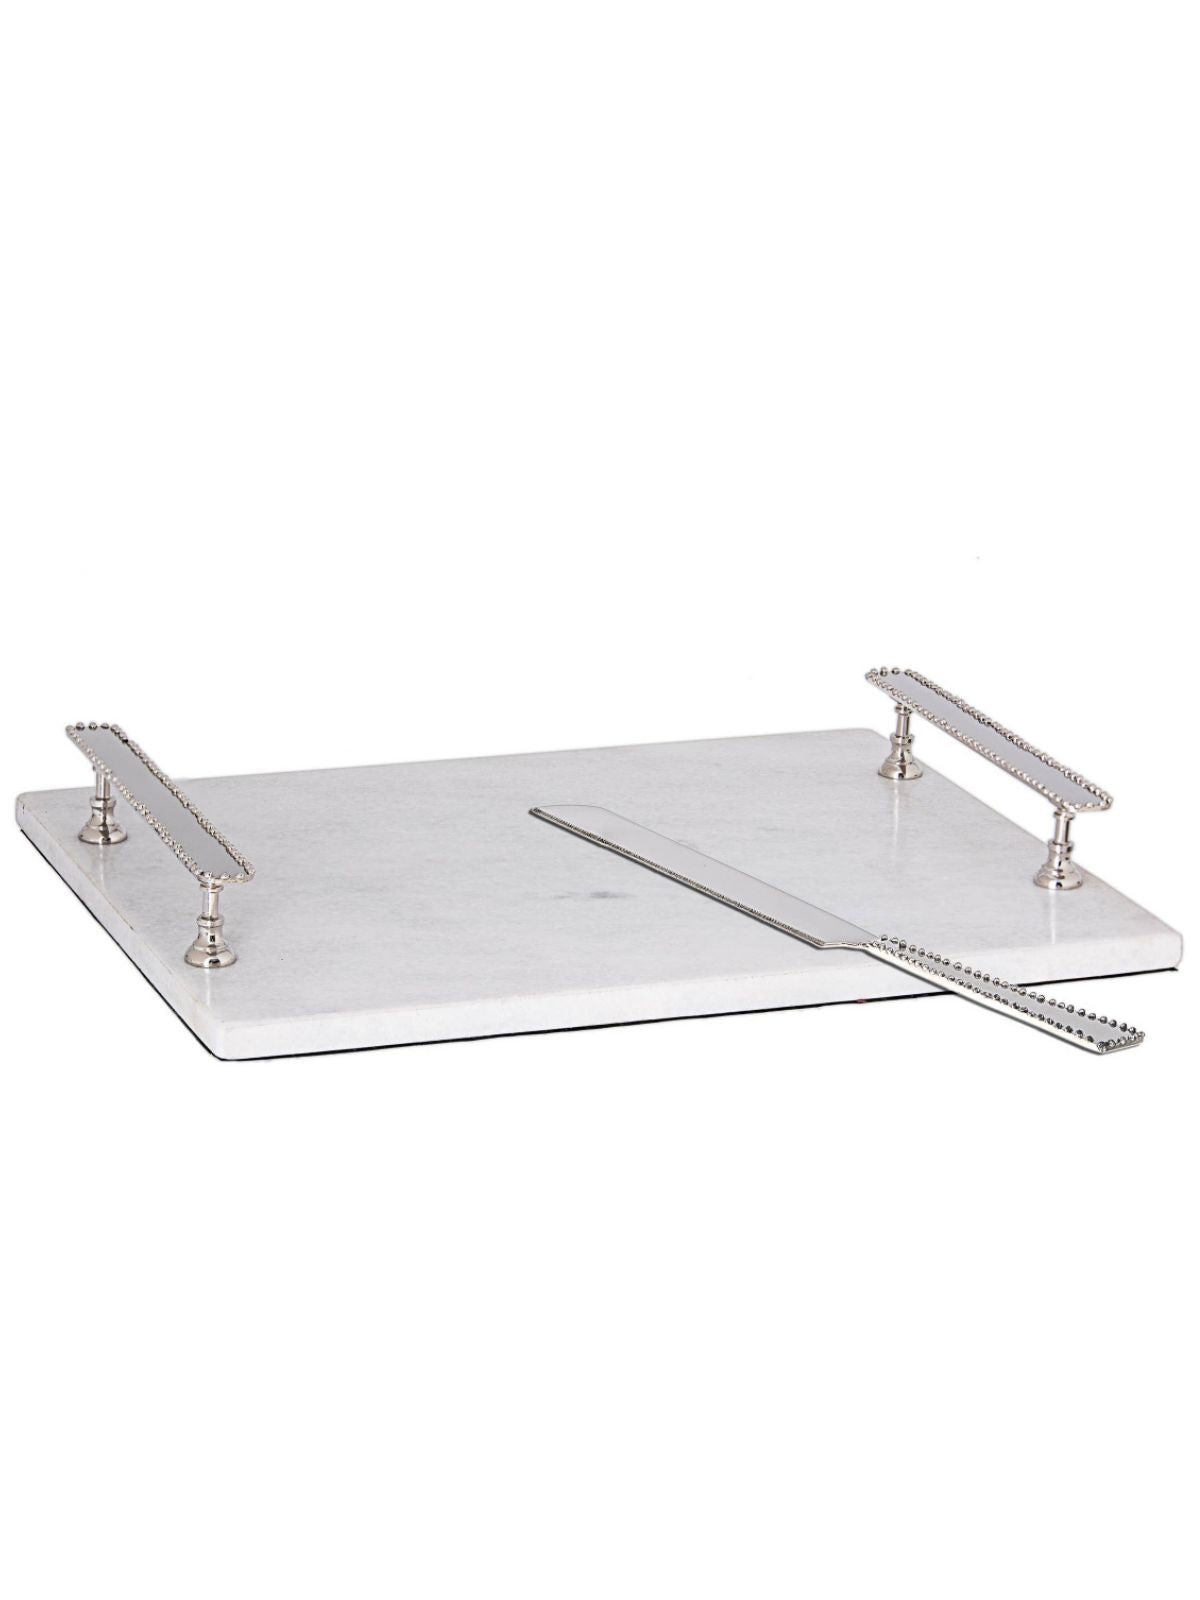 Luxurious White Marble Tray with Silver Beaded Handles and Stainless Steel Knife, 11W x 14L.